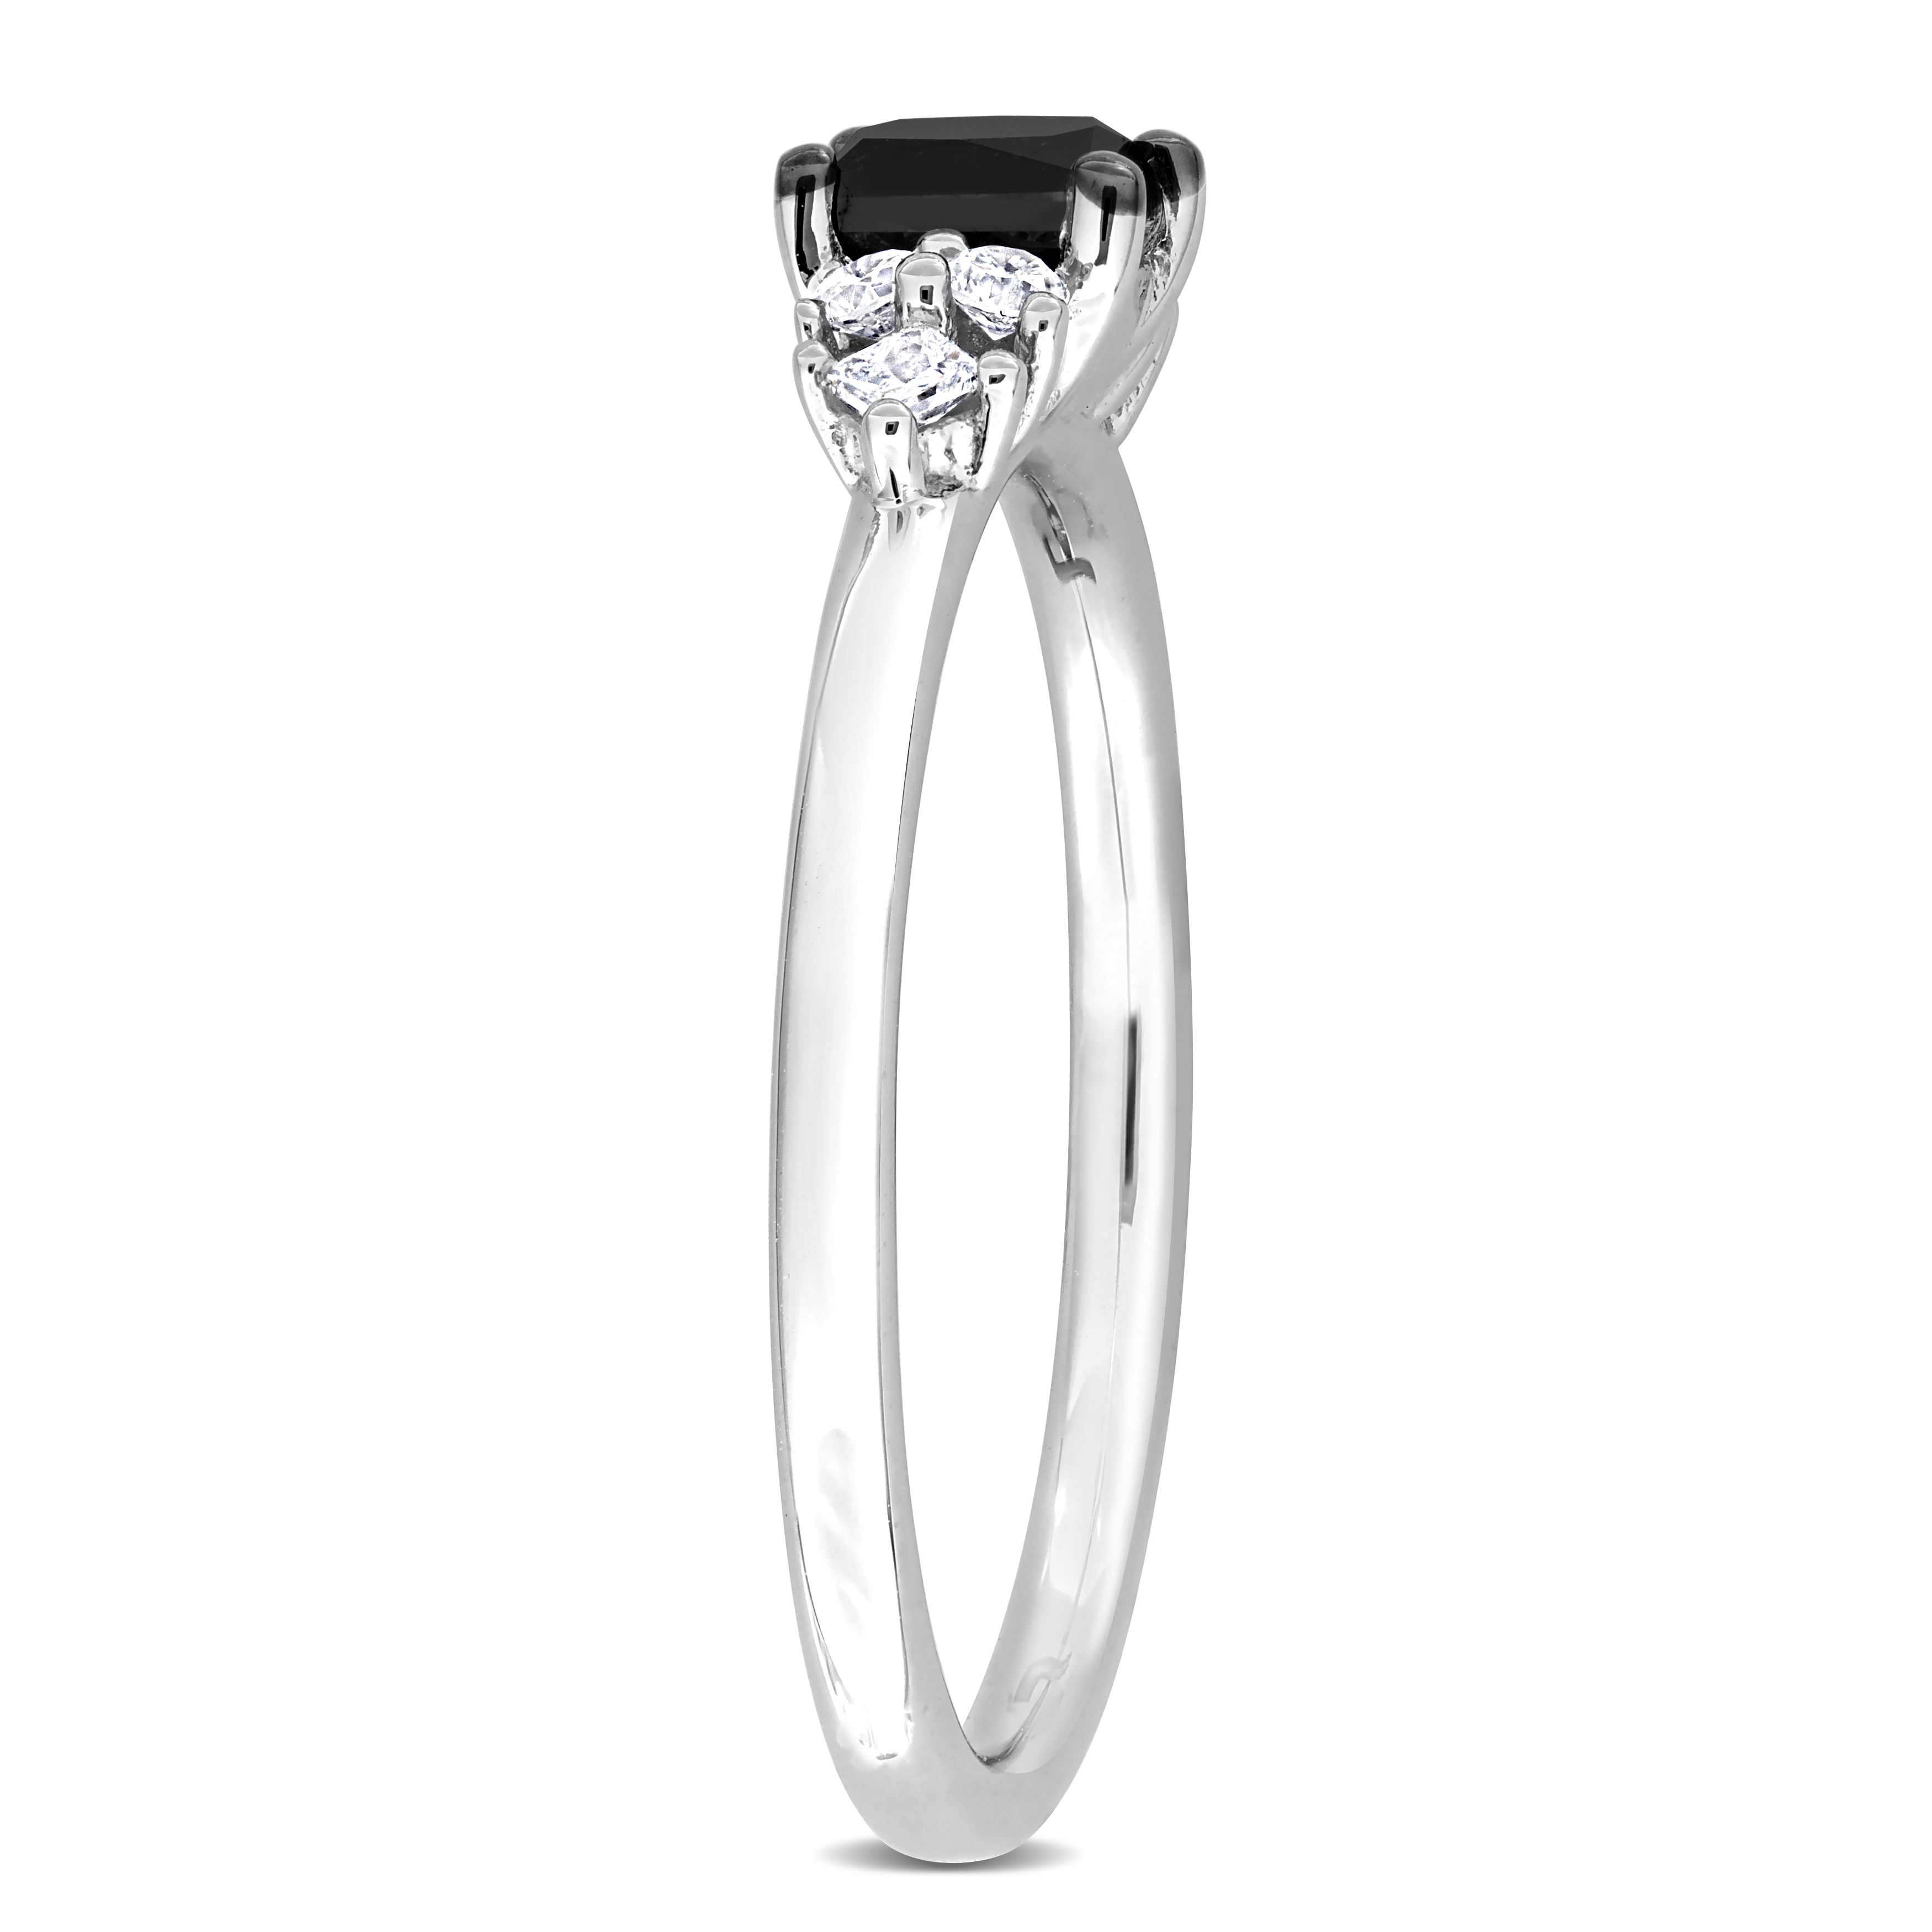 3/4 CT TDW Black and White Princess and Round-Cut Diamond Seven-Stone Ring in 14k White Gold